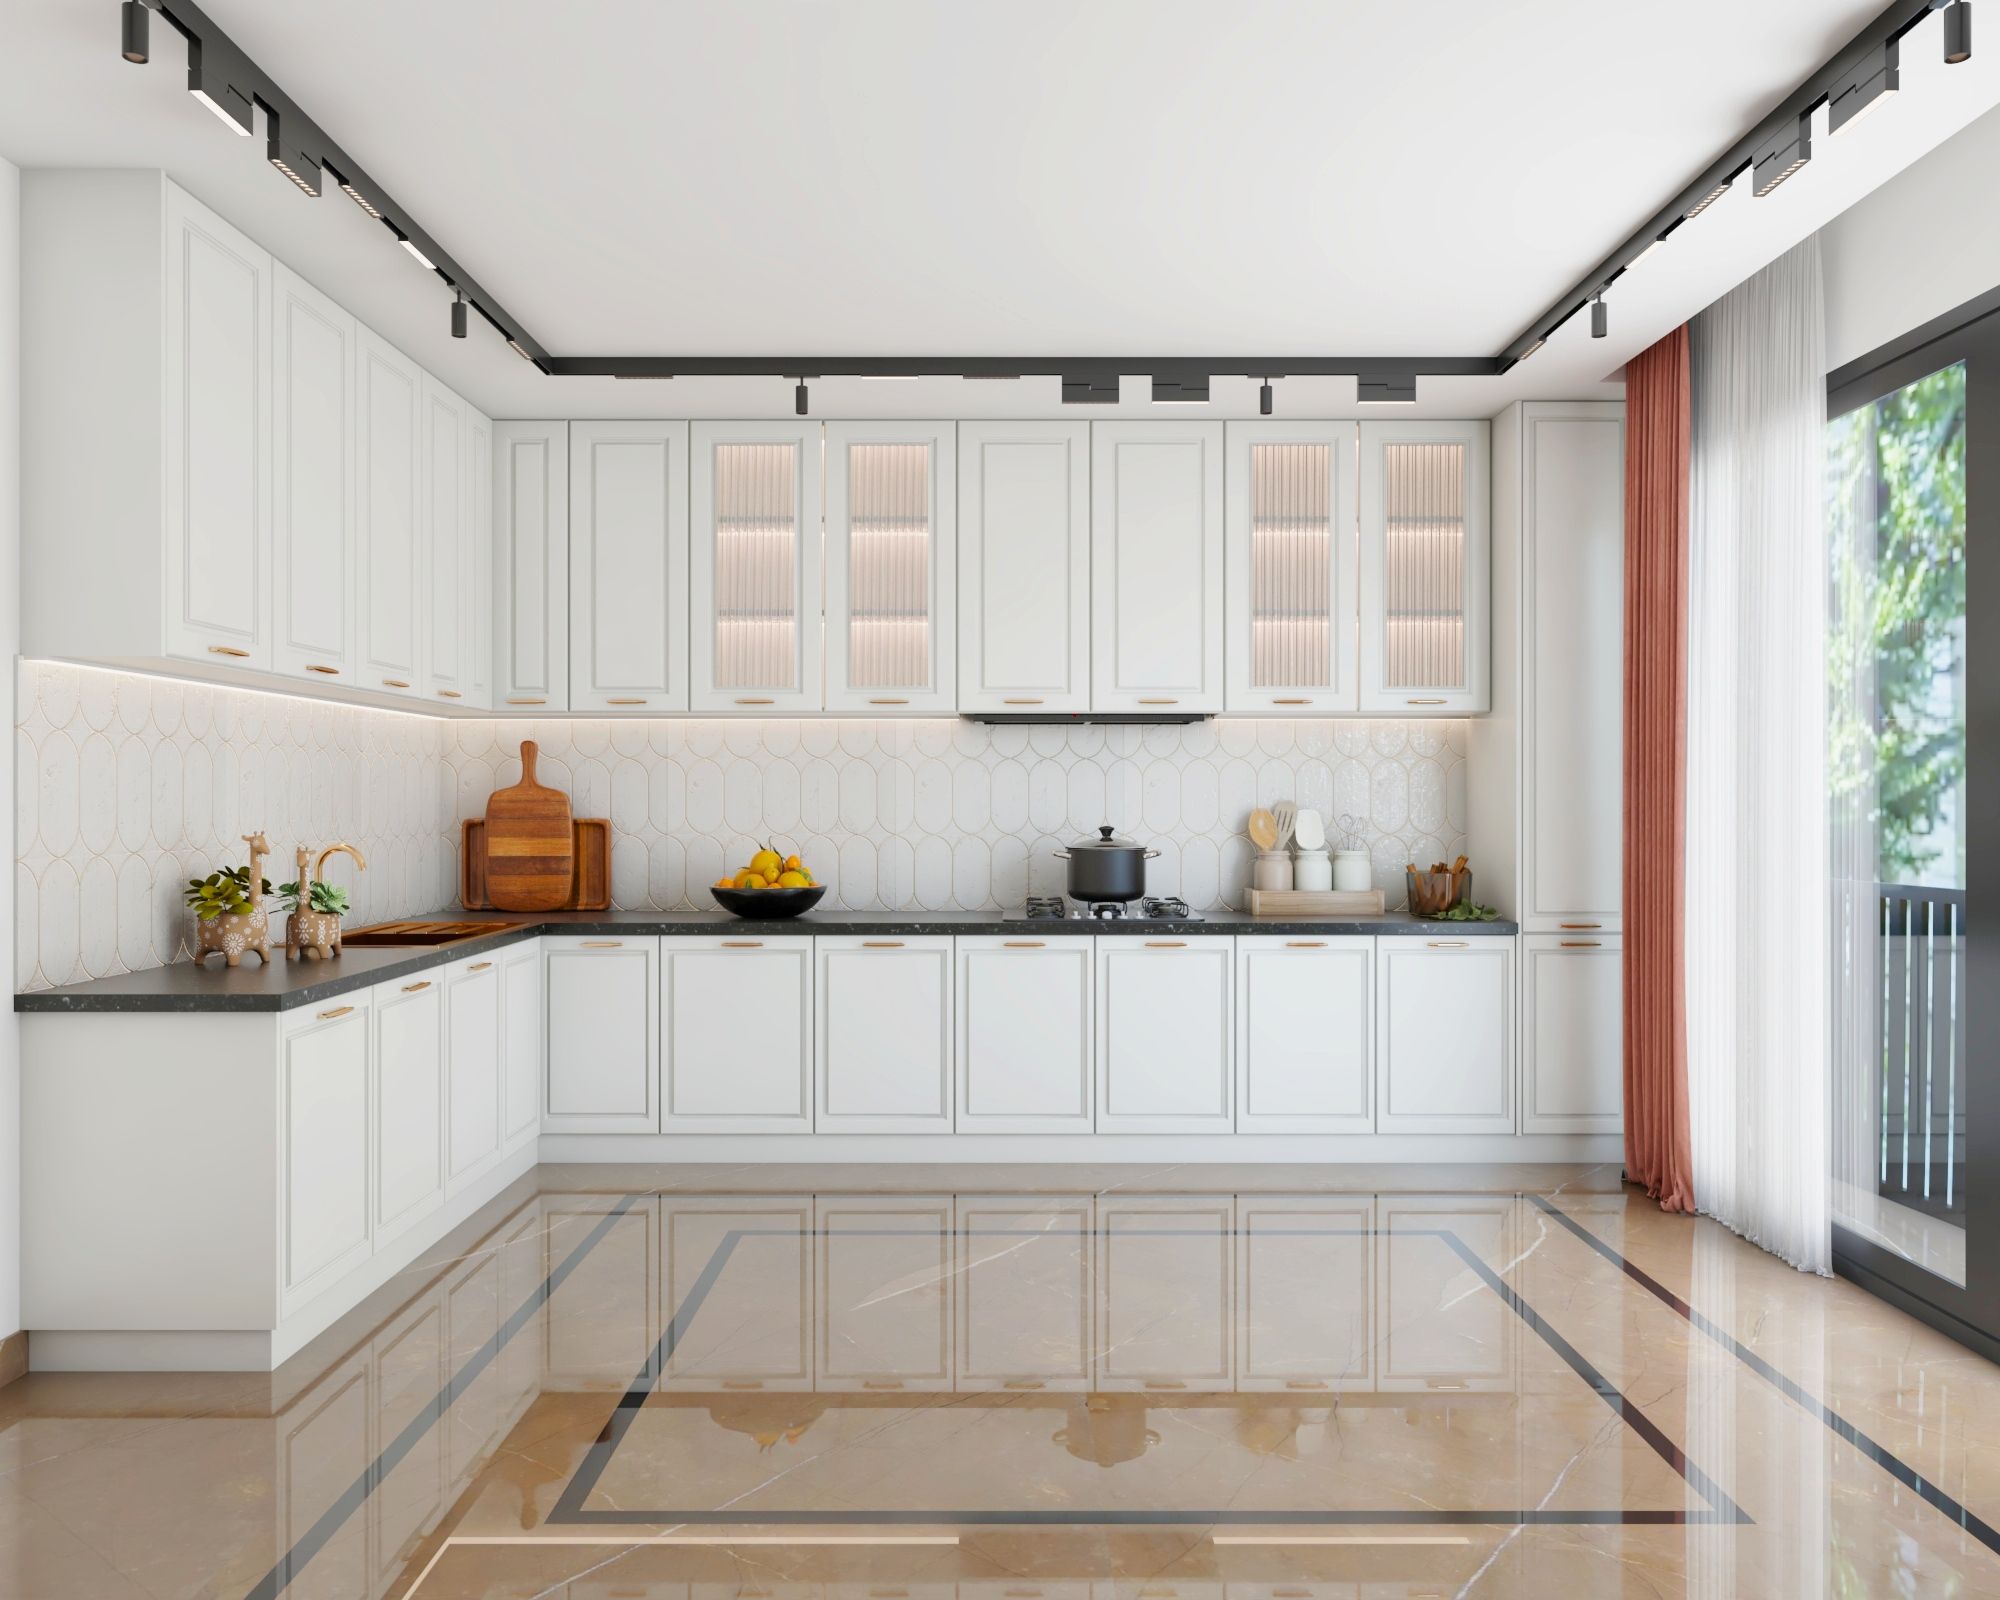 Contemporary L Shaped Modular Kitchen Cabinet Design With Pomelia Cabinets